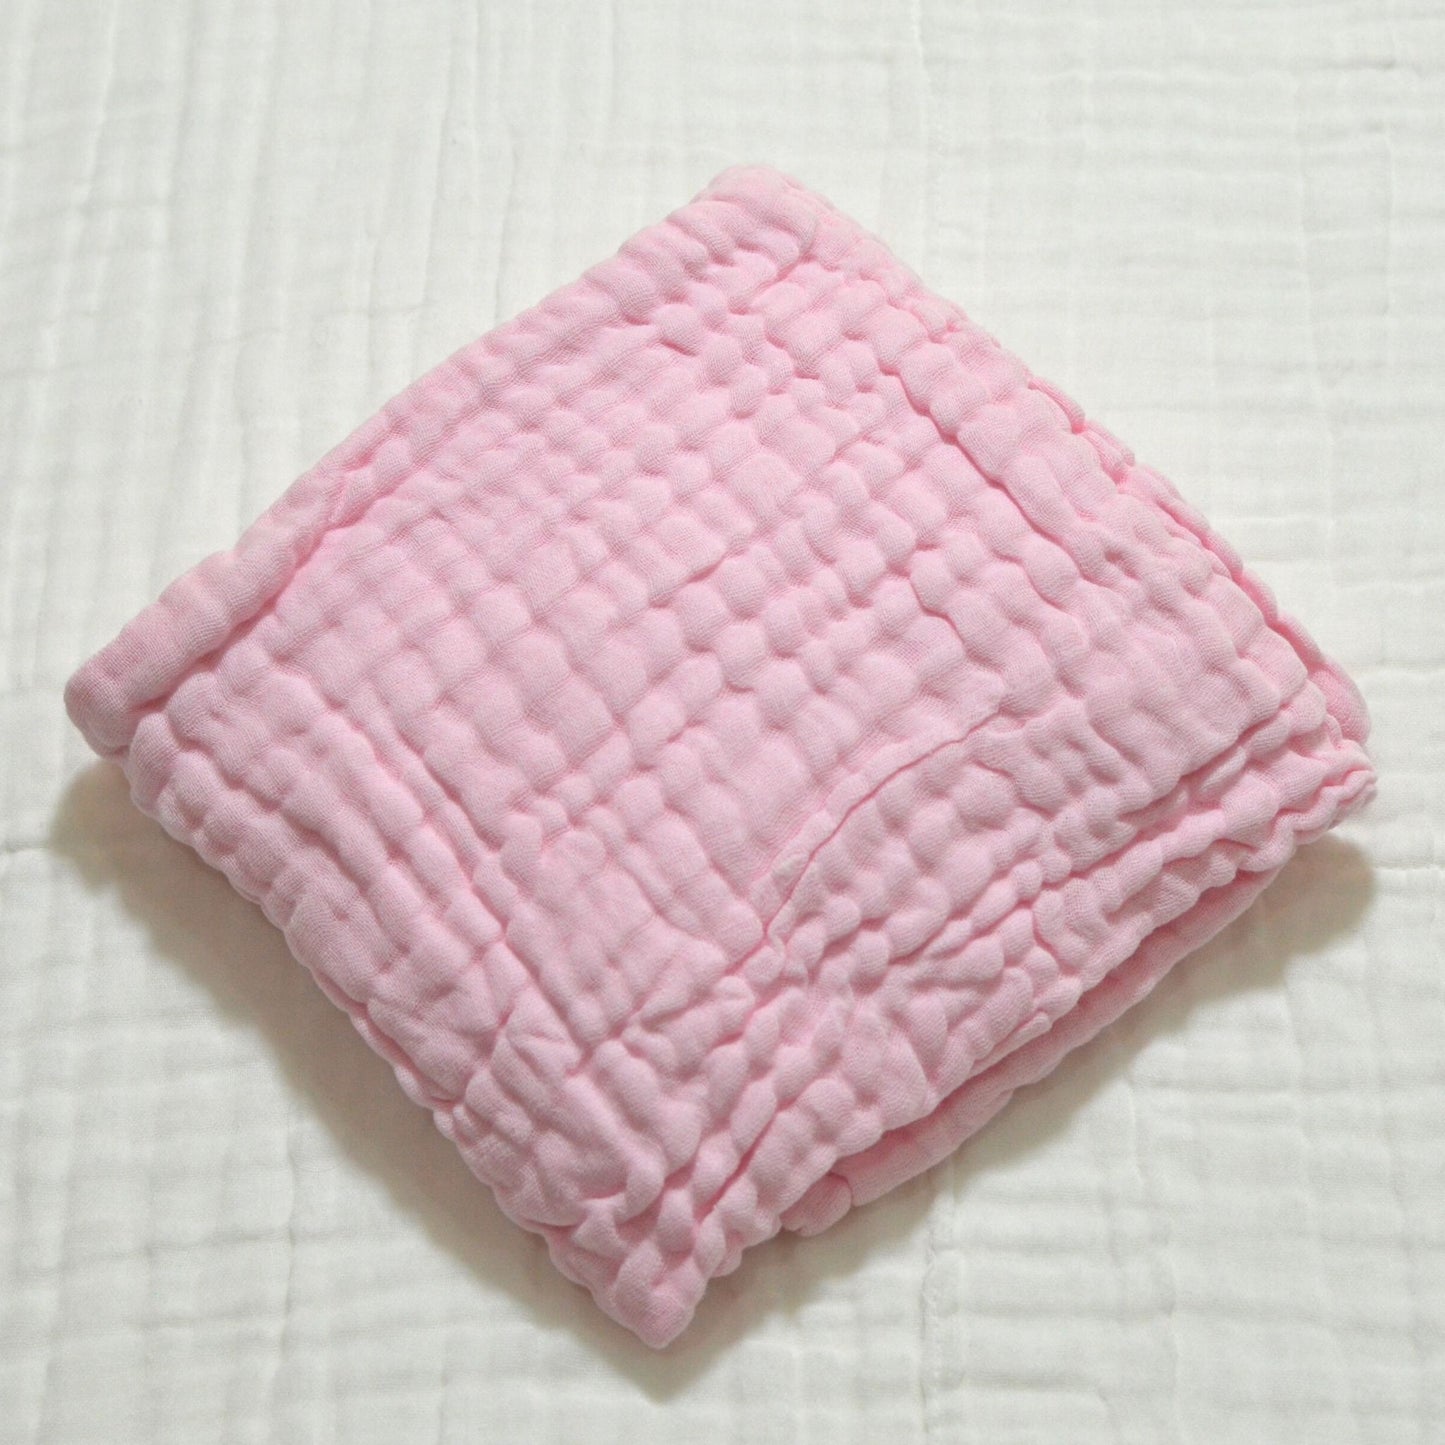 6-Layered Cotton Gauze Baby Towel/Blankets - Pink, Blue 105x105cm